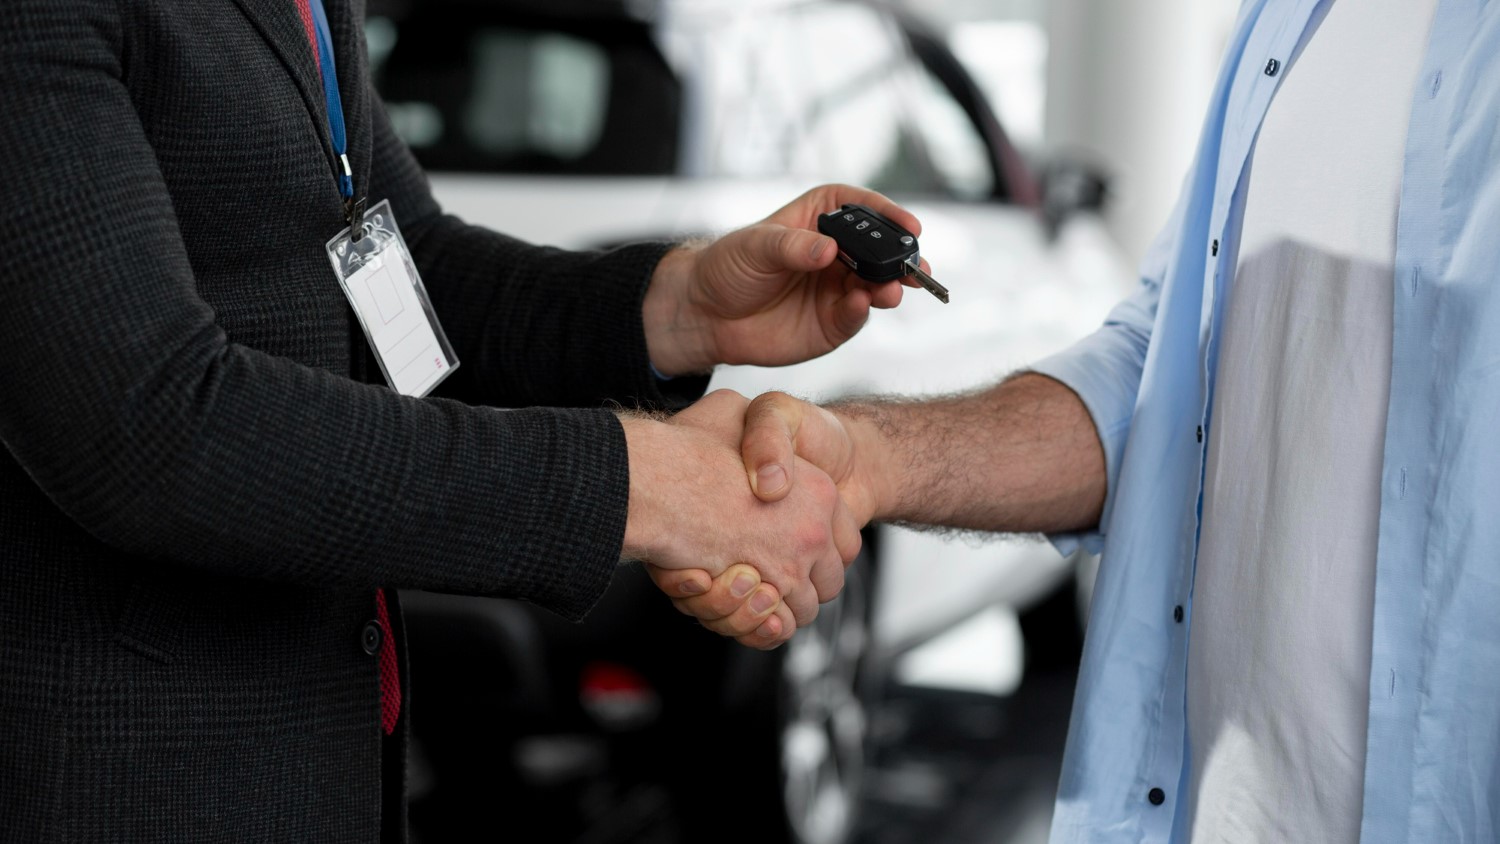 image of car key handover with car in background